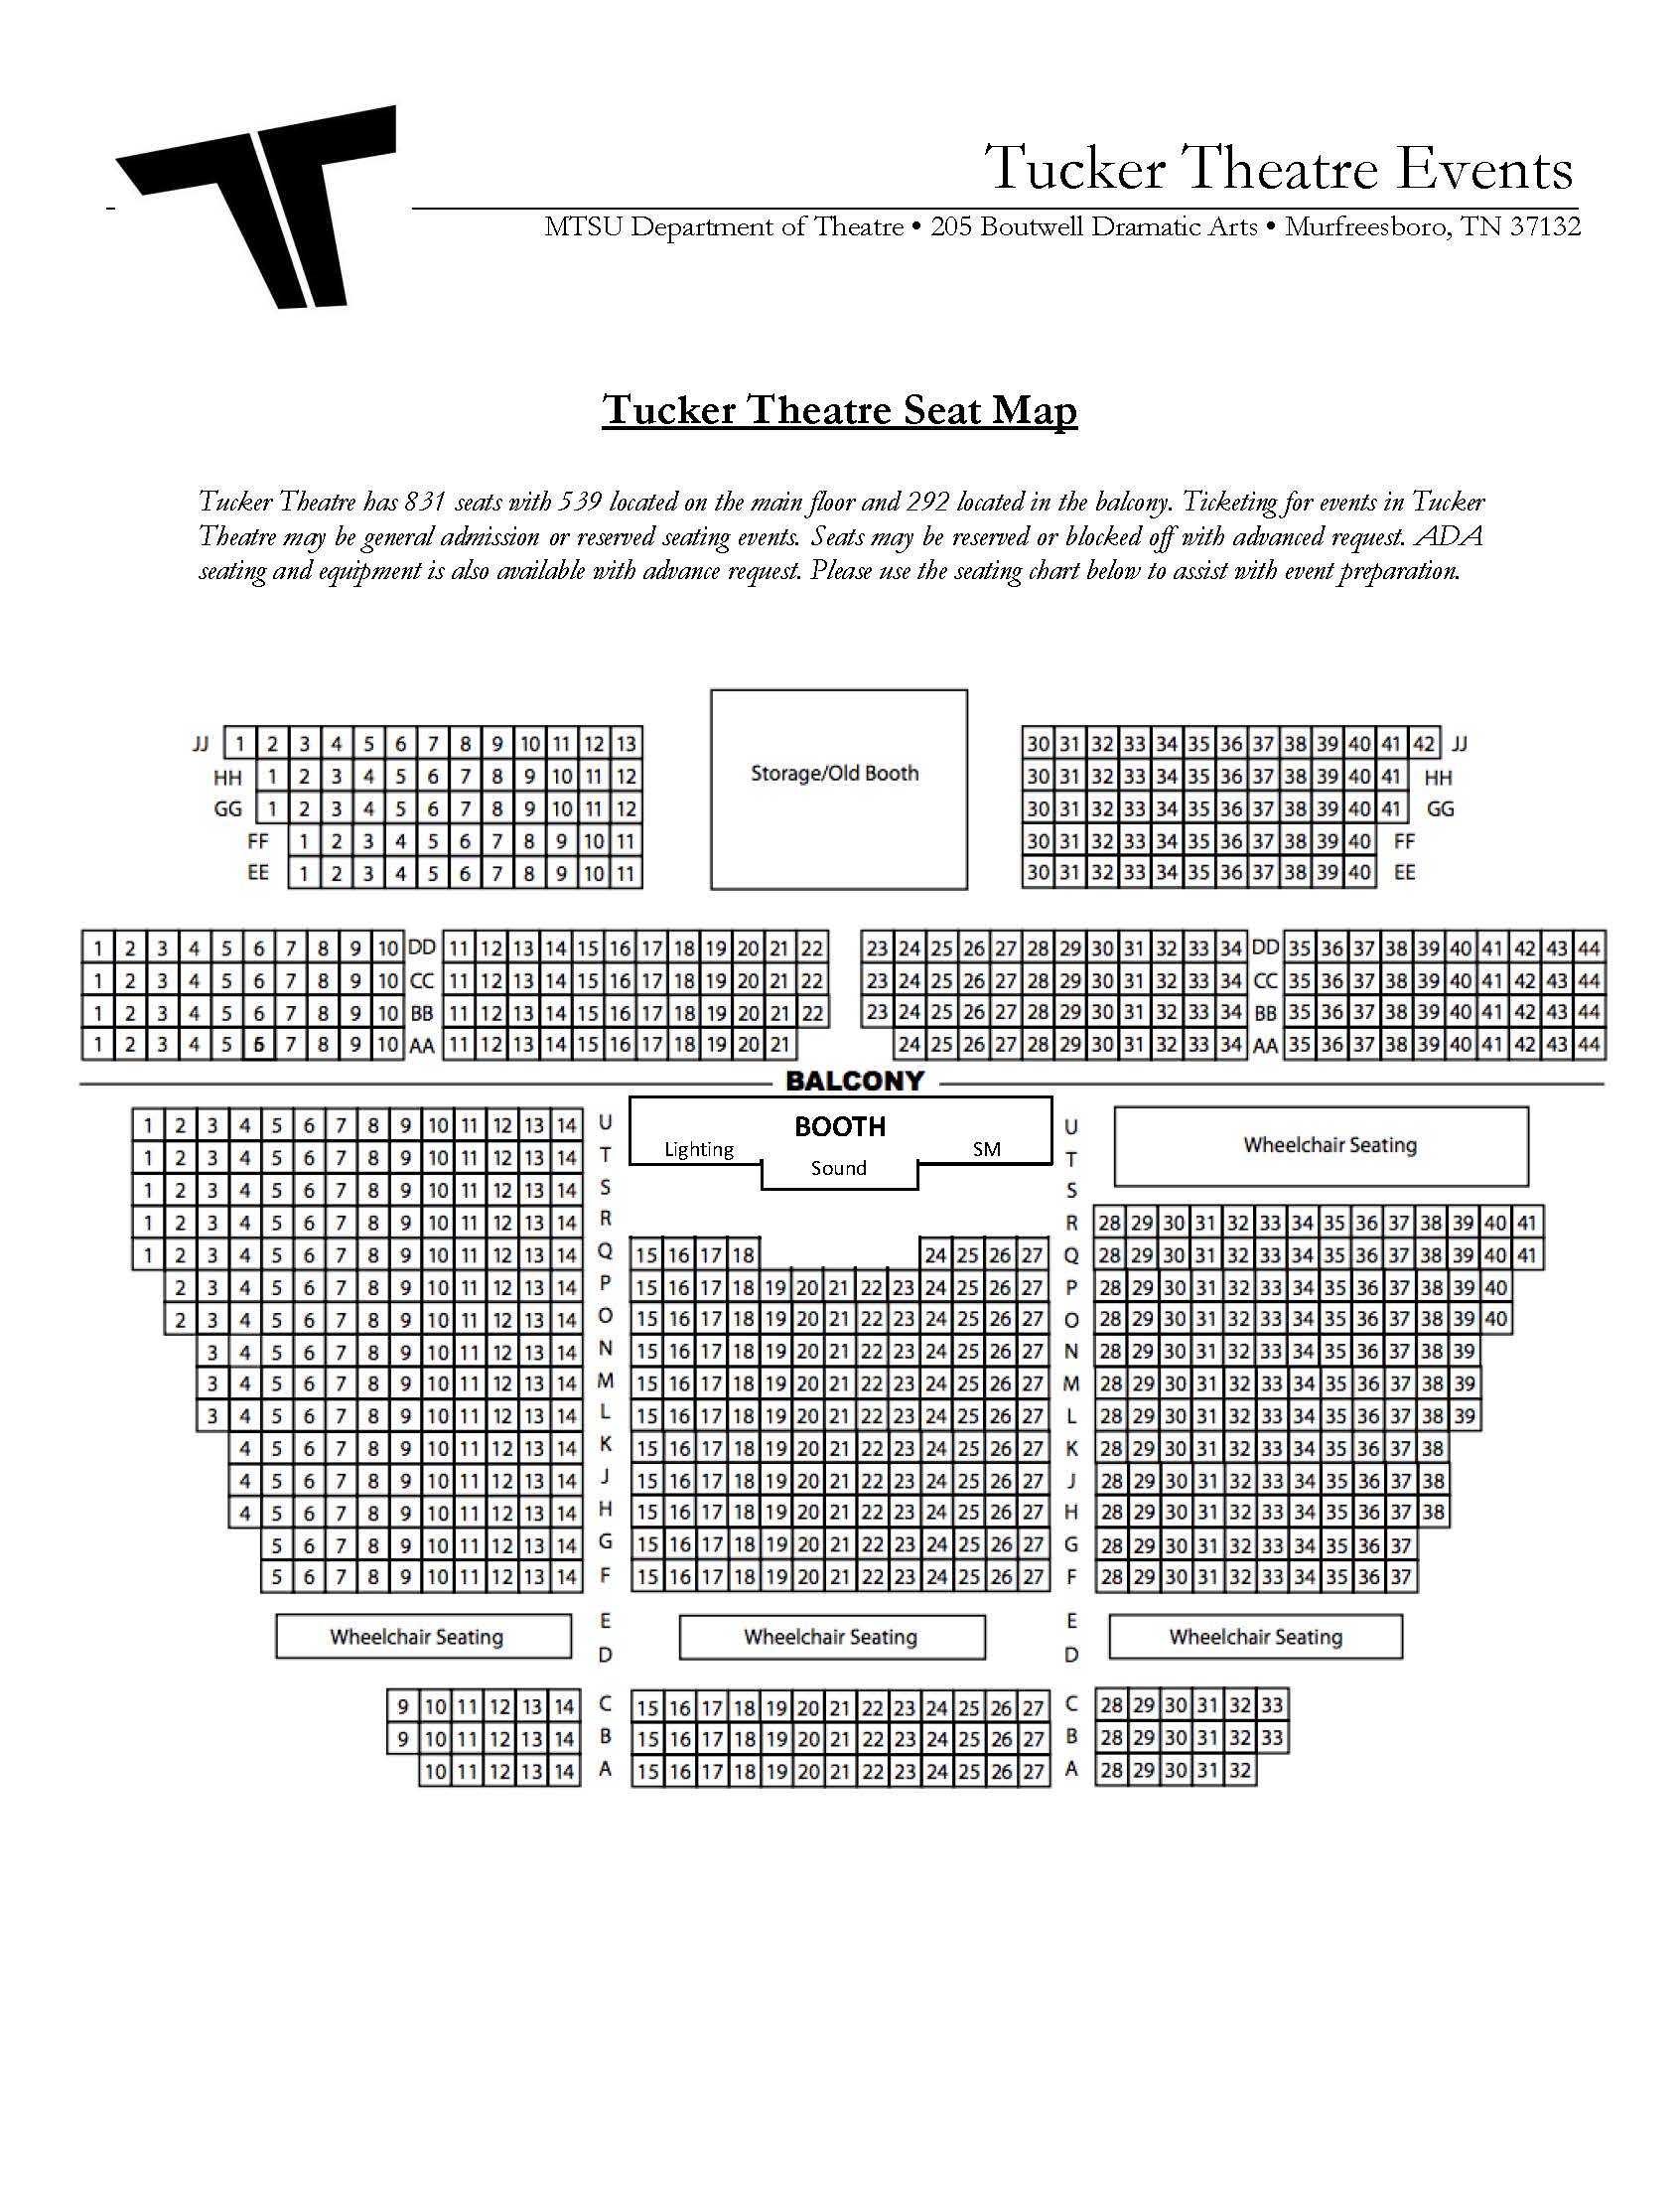 Tucker Theatre Seating Map